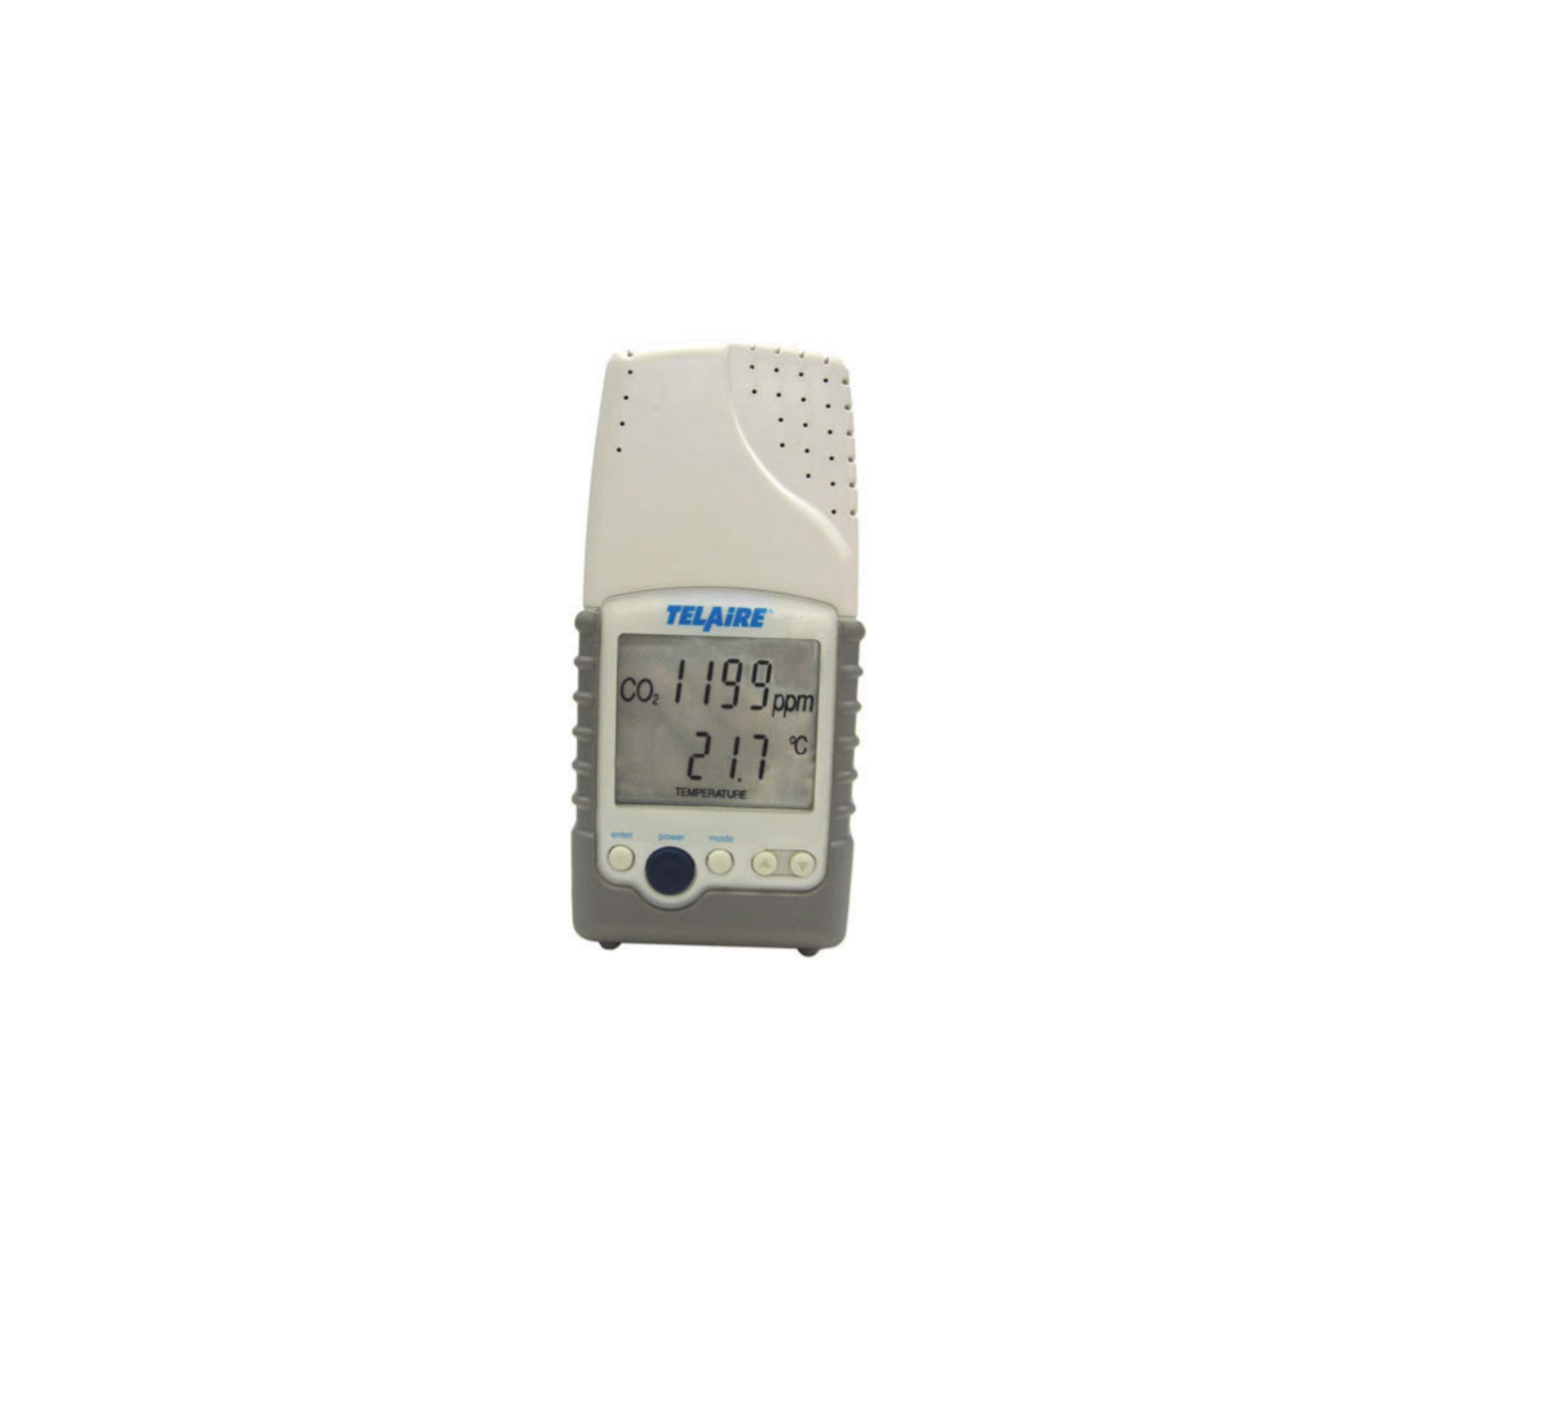 Telaire Carbon Dioxide and Temperature Monitor Instructions